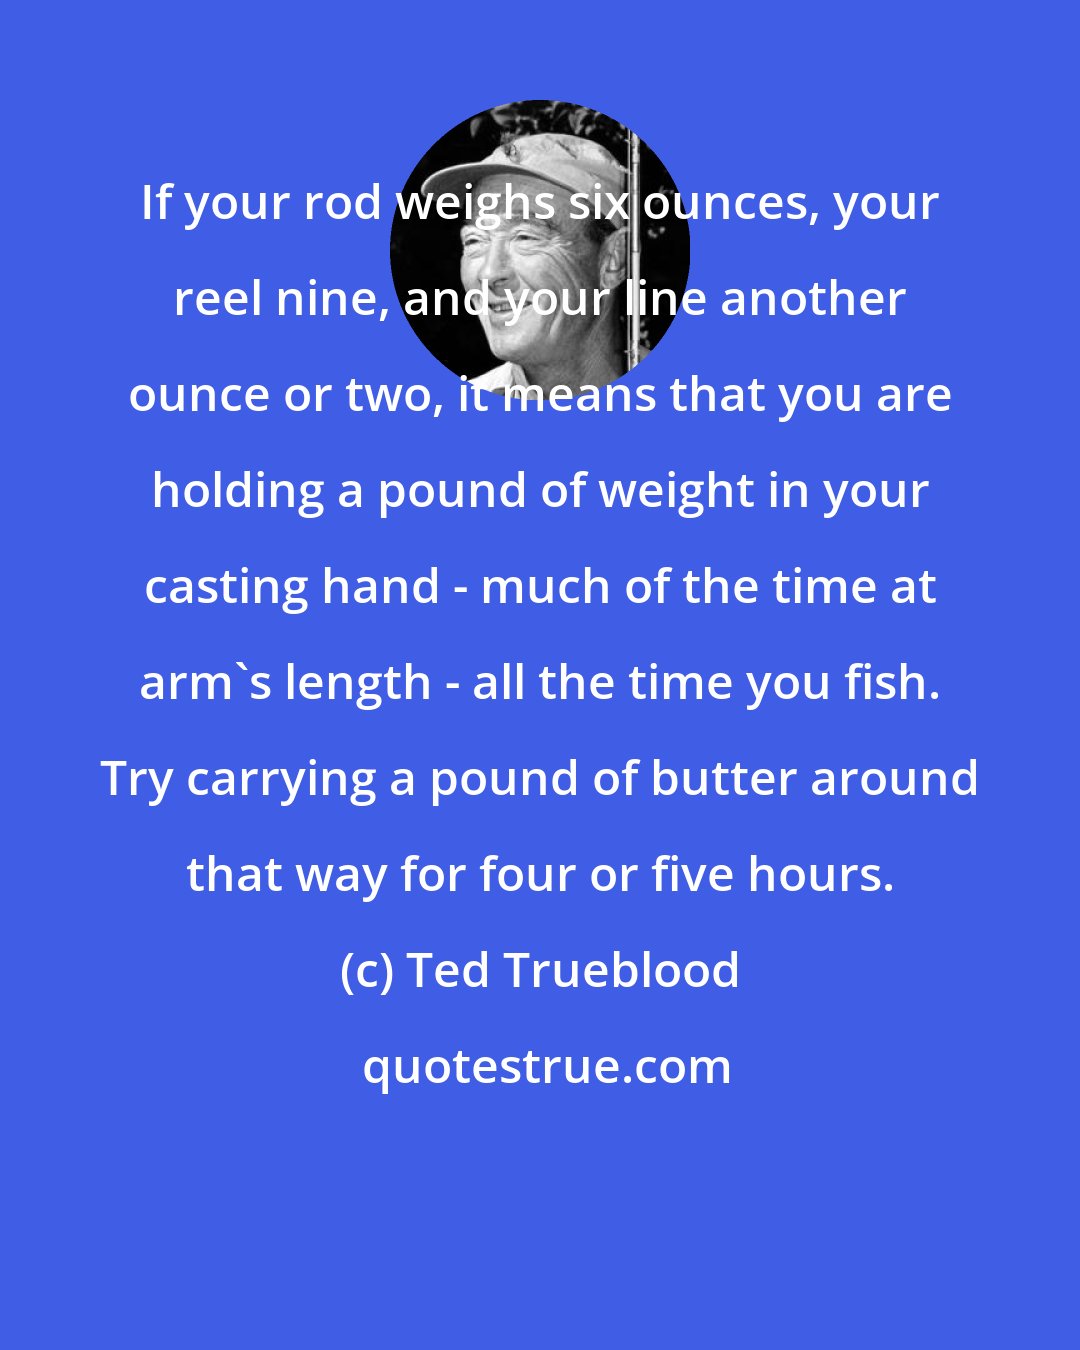 Ted Trueblood: If your rod weighs six ounces, your reel nine, and your line another ounce or two, it means that you are holding a pound of weight in your casting hand - much of the time at arm's length - all the time you fish. Try carrying a pound of butter around that way for four or five hours.